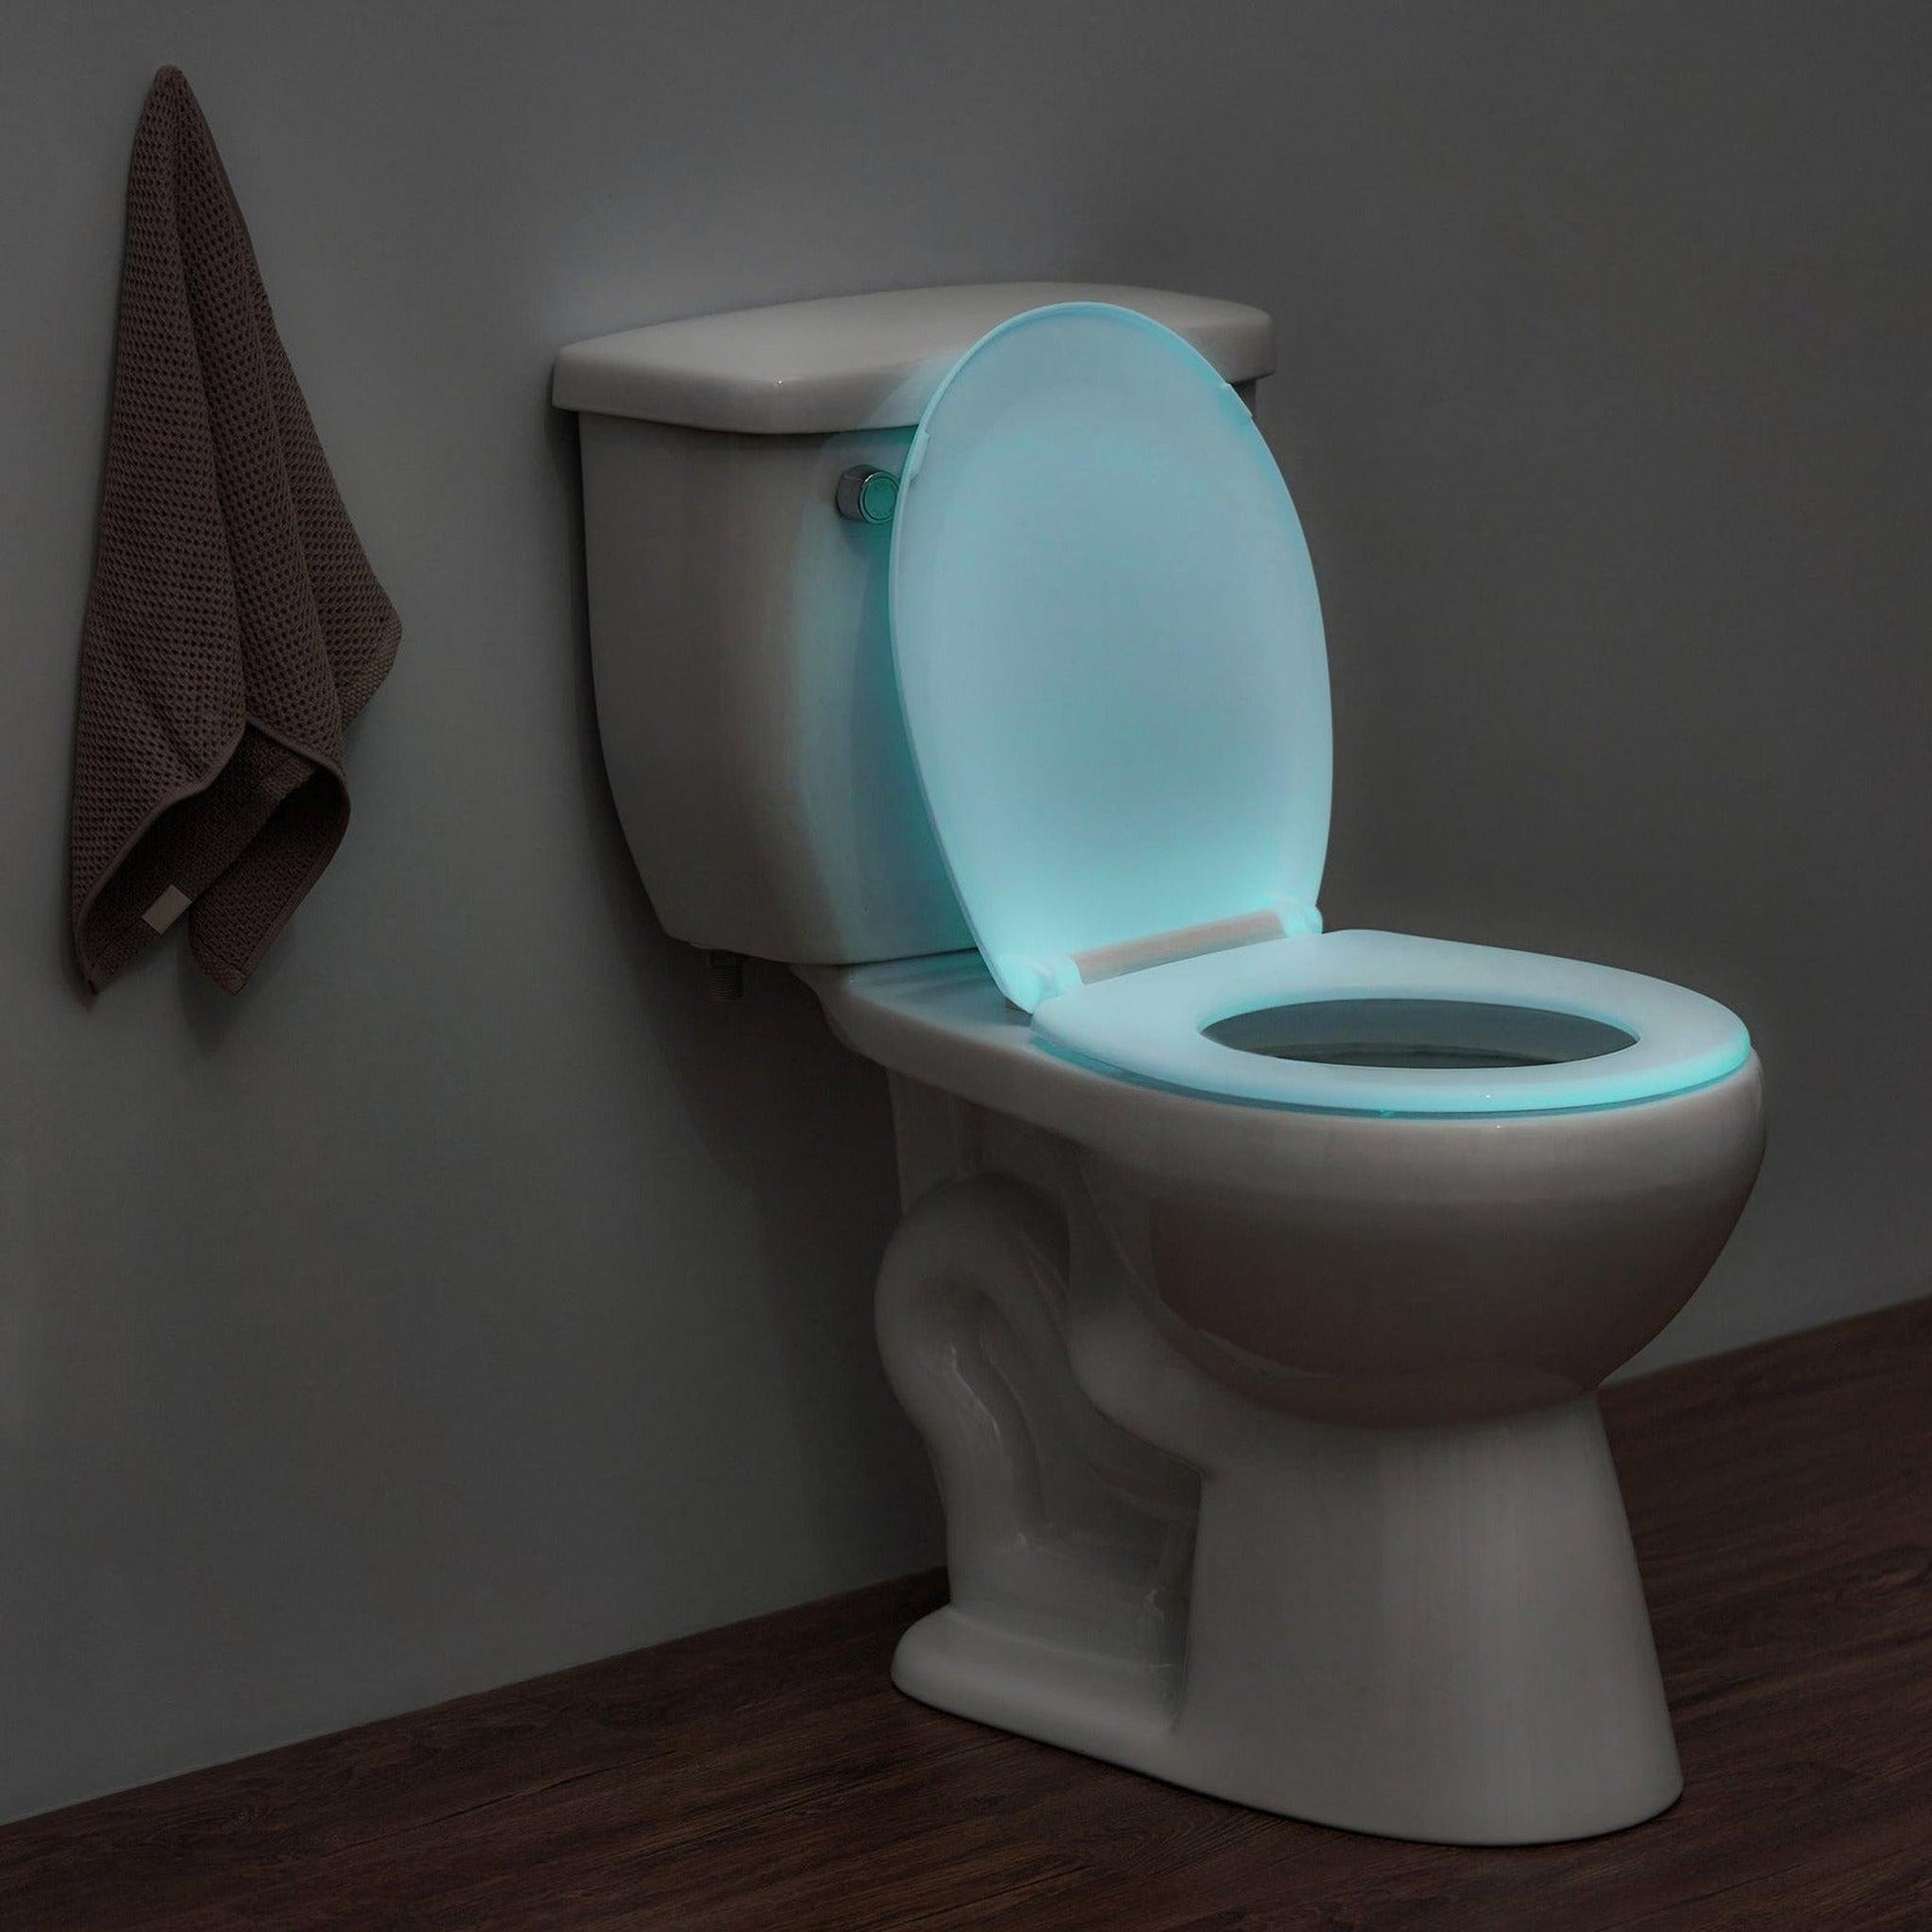 Evekare Night Glow Toilet Seat Soft Closing, Round With Blue Glow